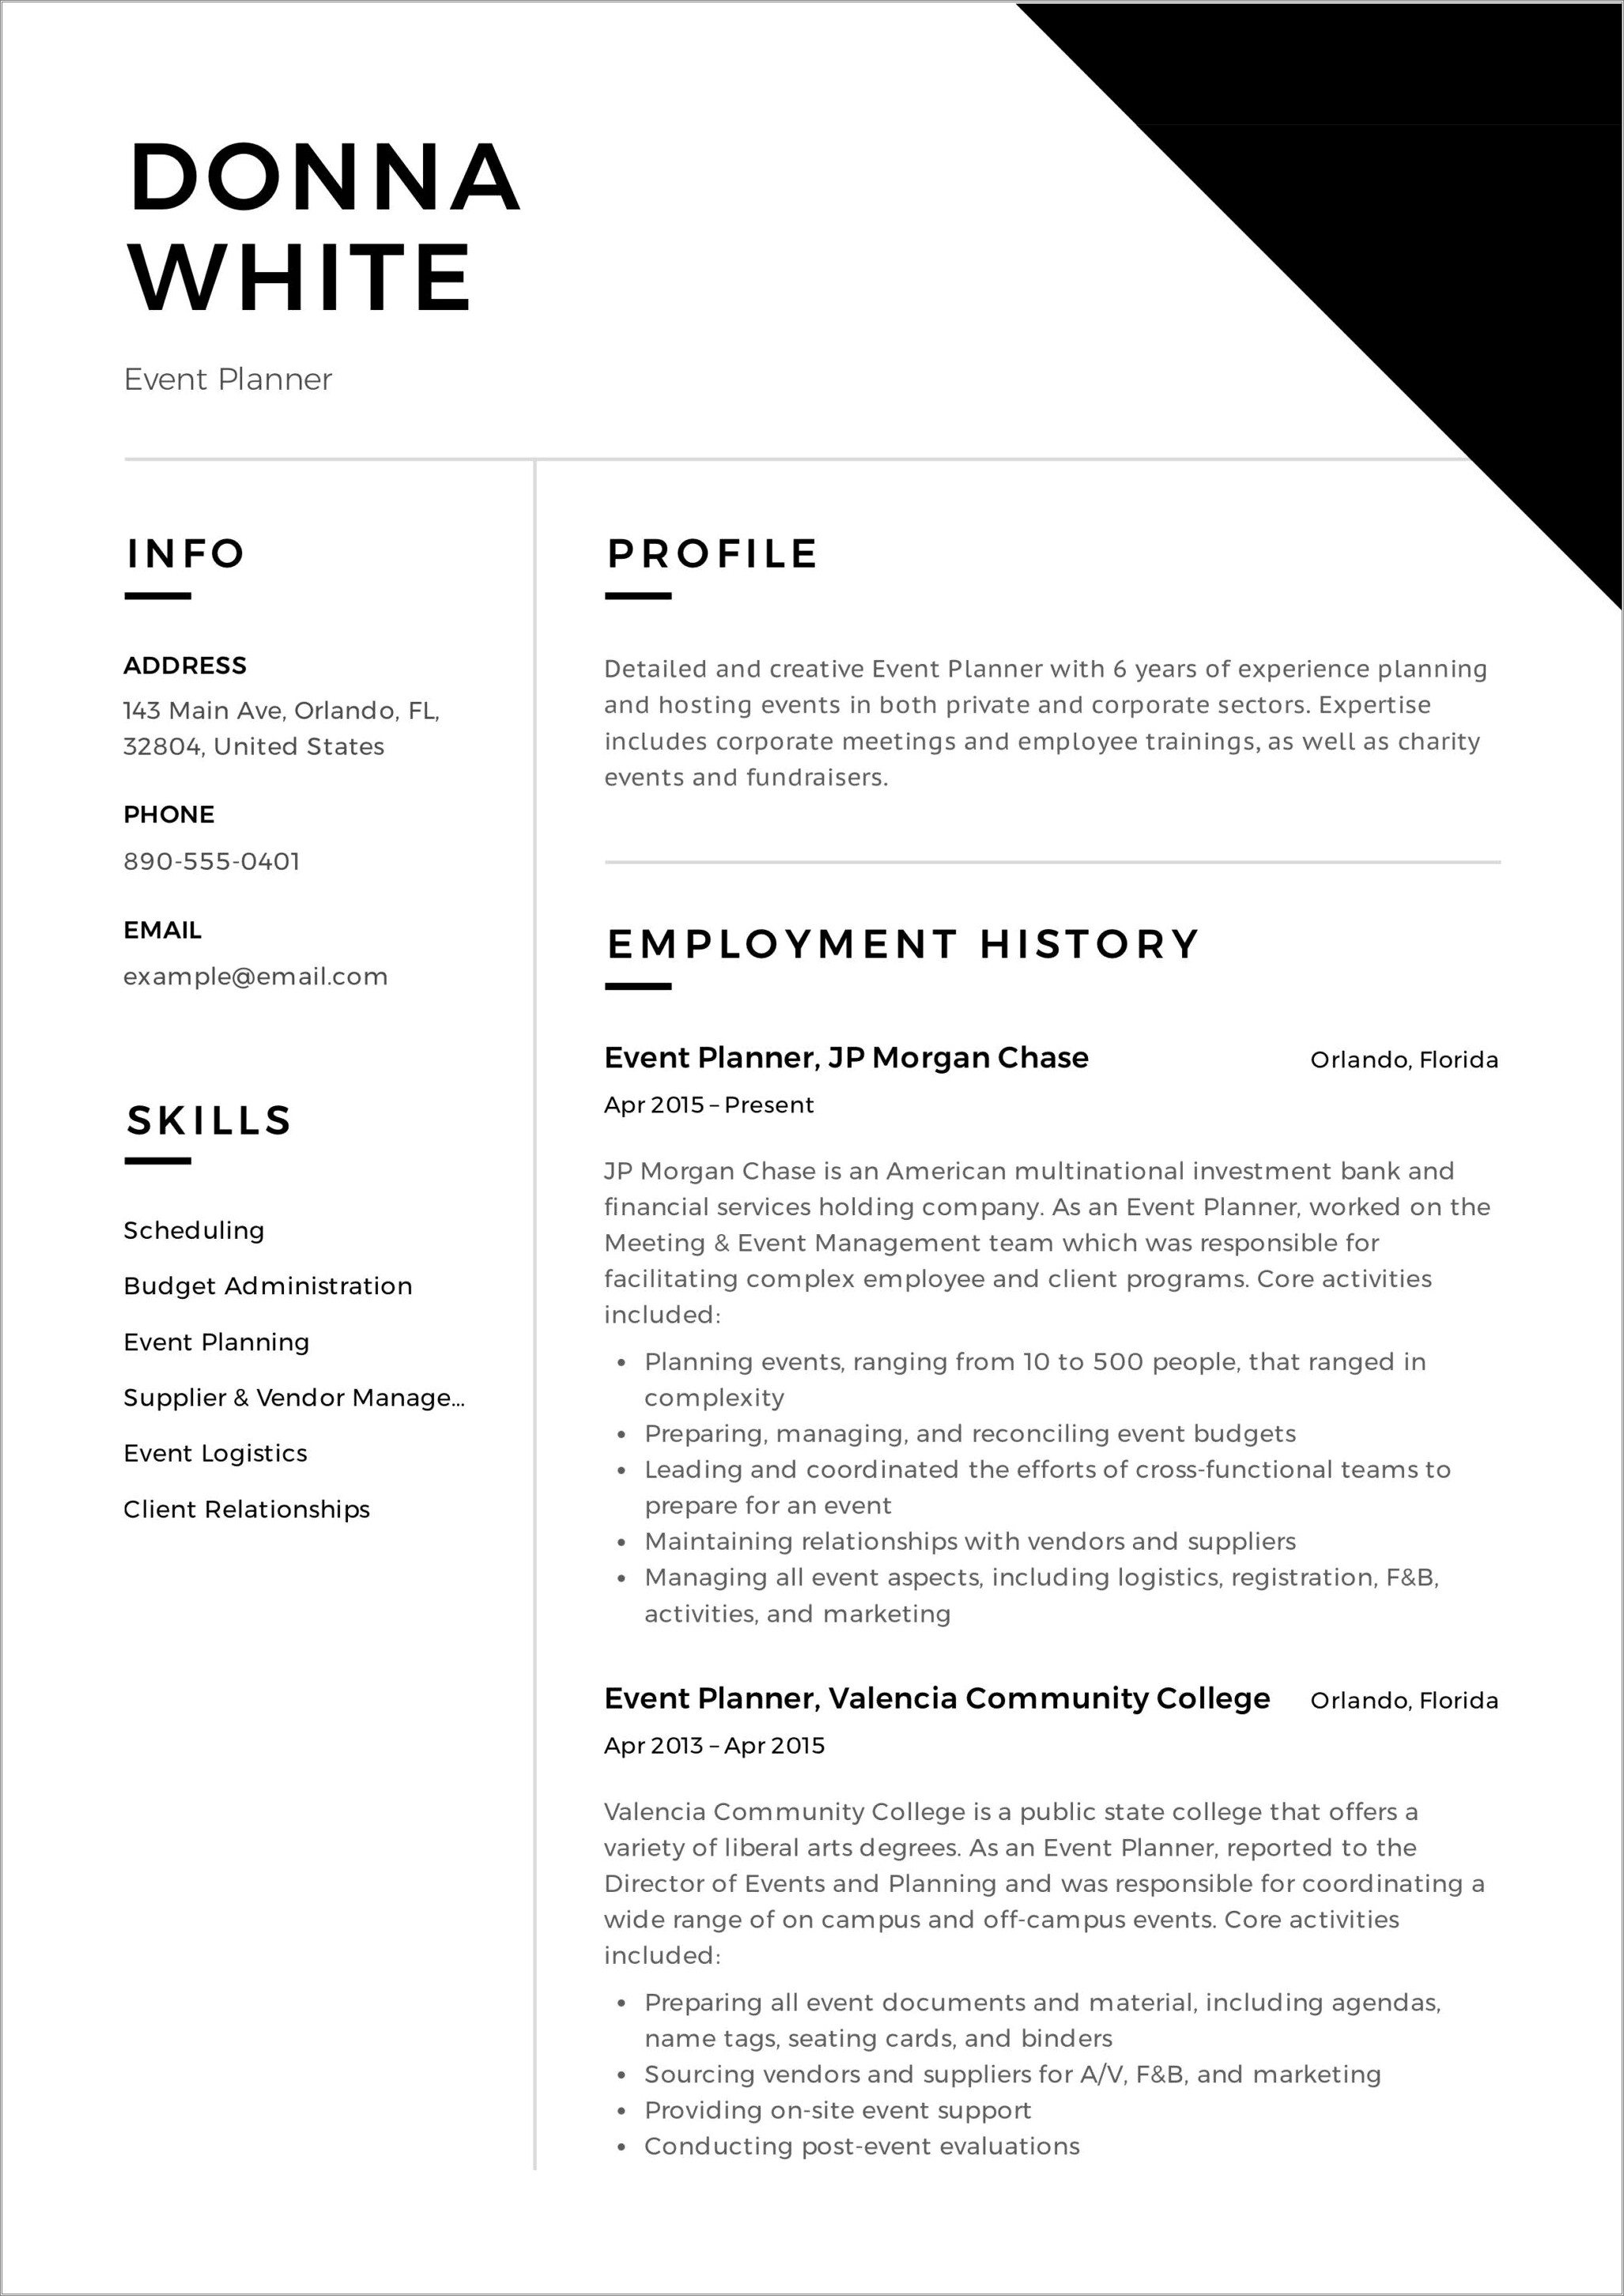 Resume For Event Planner Objective